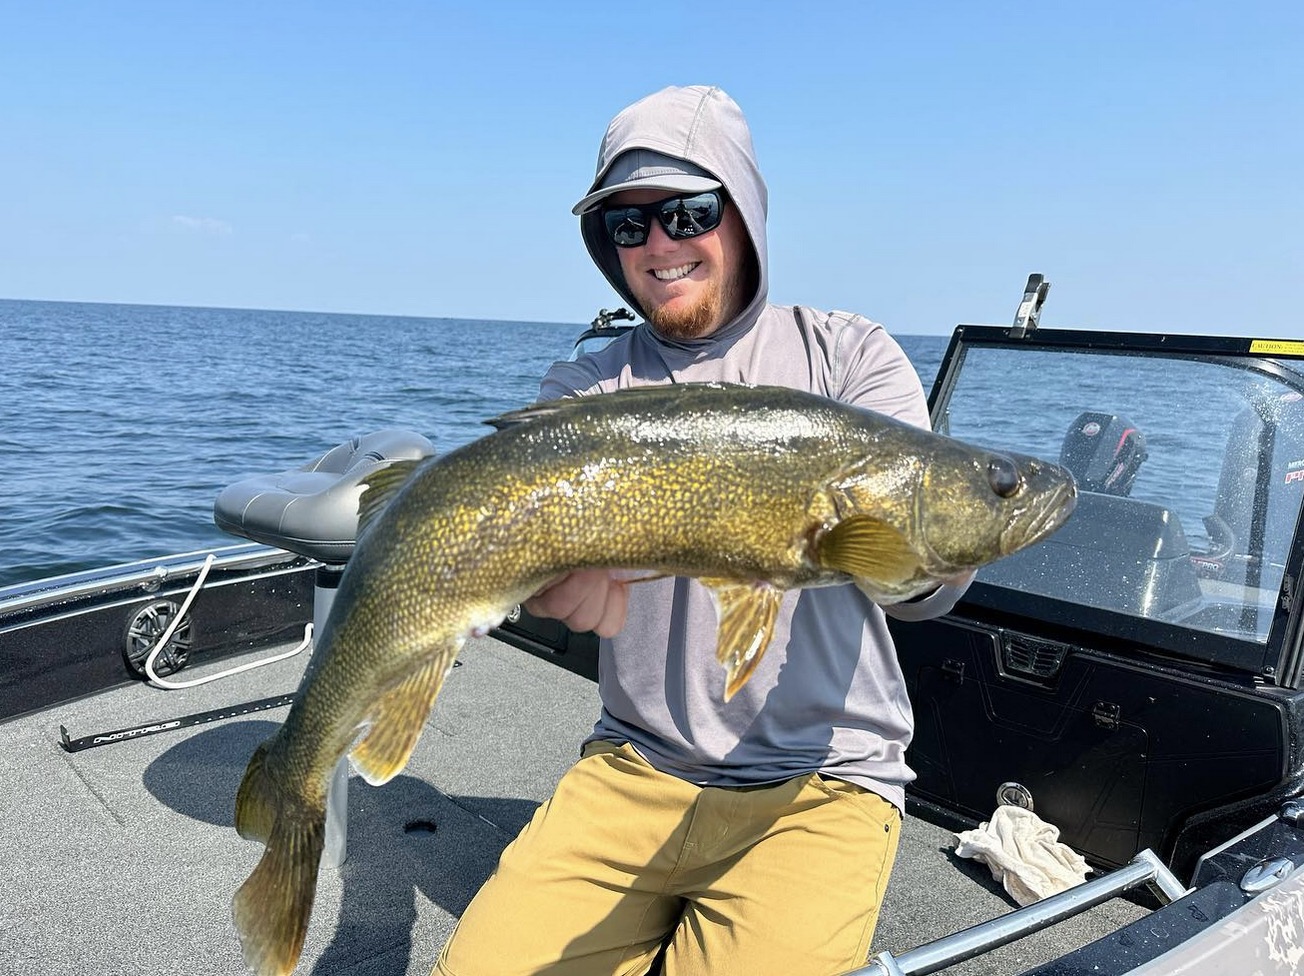 Mono out-fishes braid, 24k gold walleye dinner, Giant cisco eater